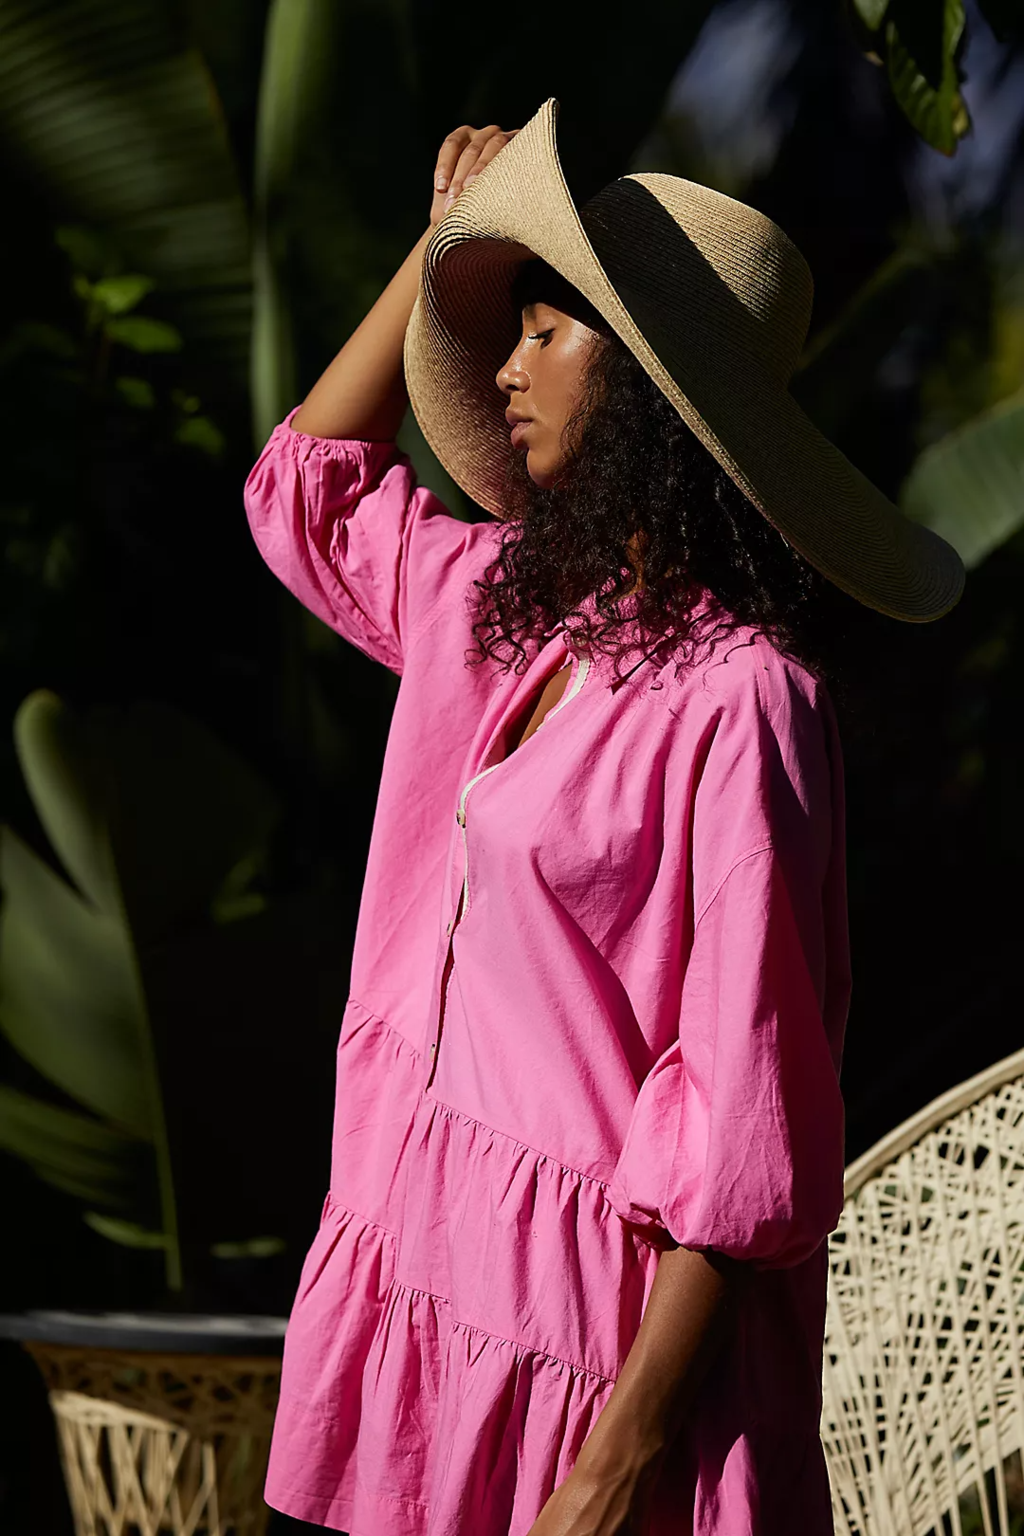 A woman in her Floppy Hat with Mini Dress